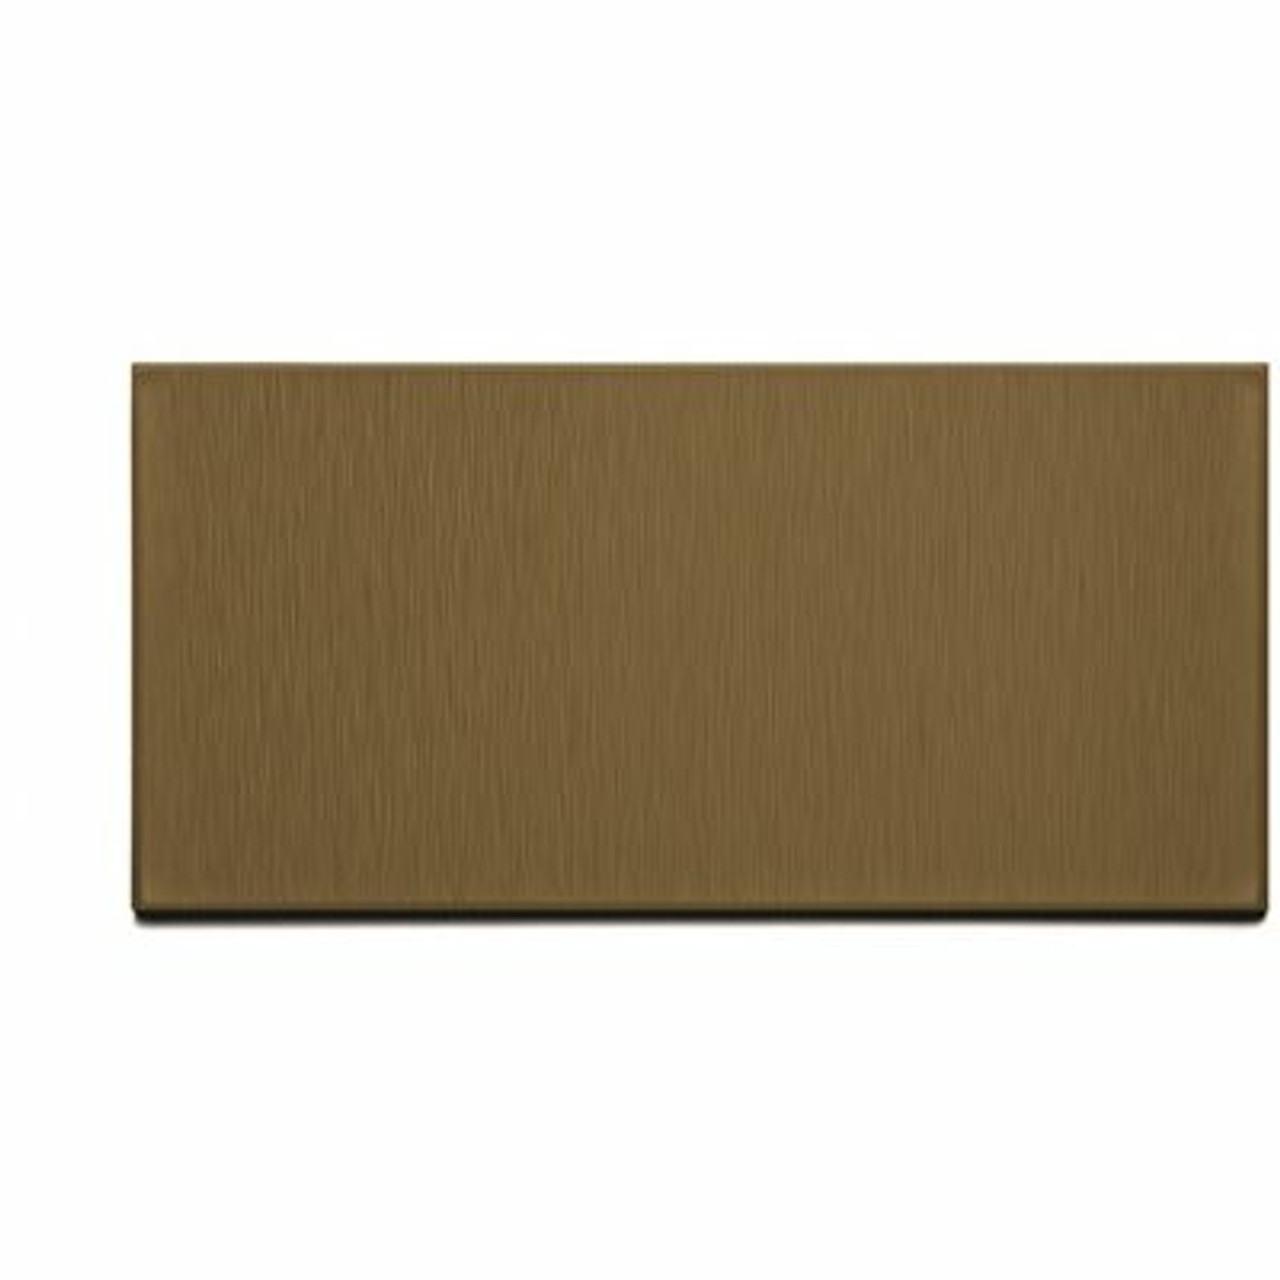 Aspect Short Grain 6 In. X 3 In. Brushed Bronze Metal Decorative Wall Tile (8-Pack)